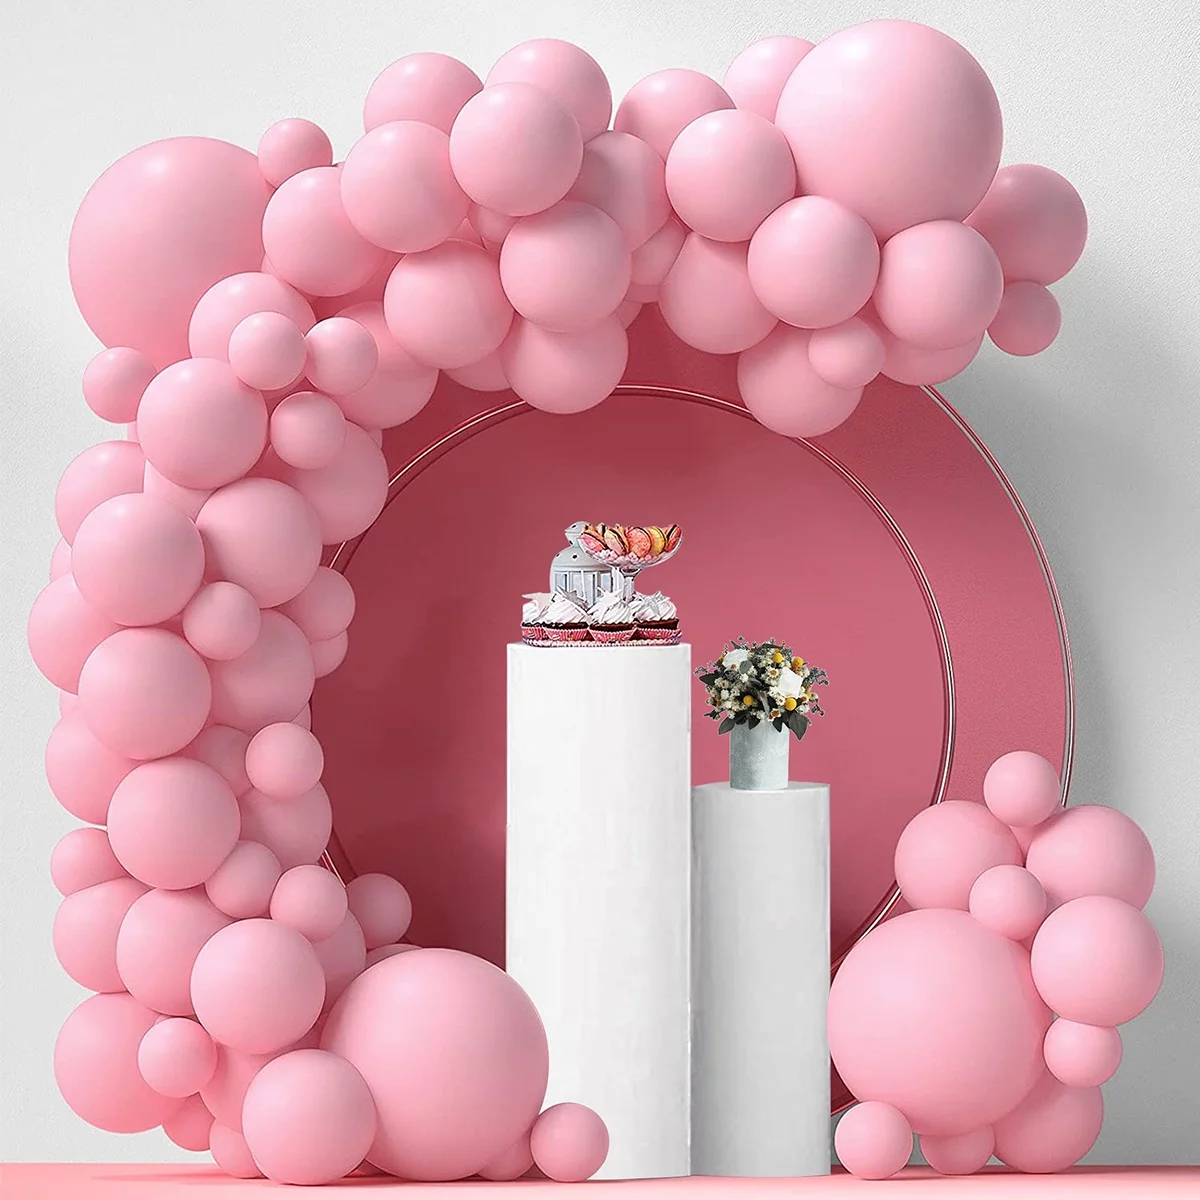 How to Make a Balloon Arch on Your Own: 9 Easy Steps to Take